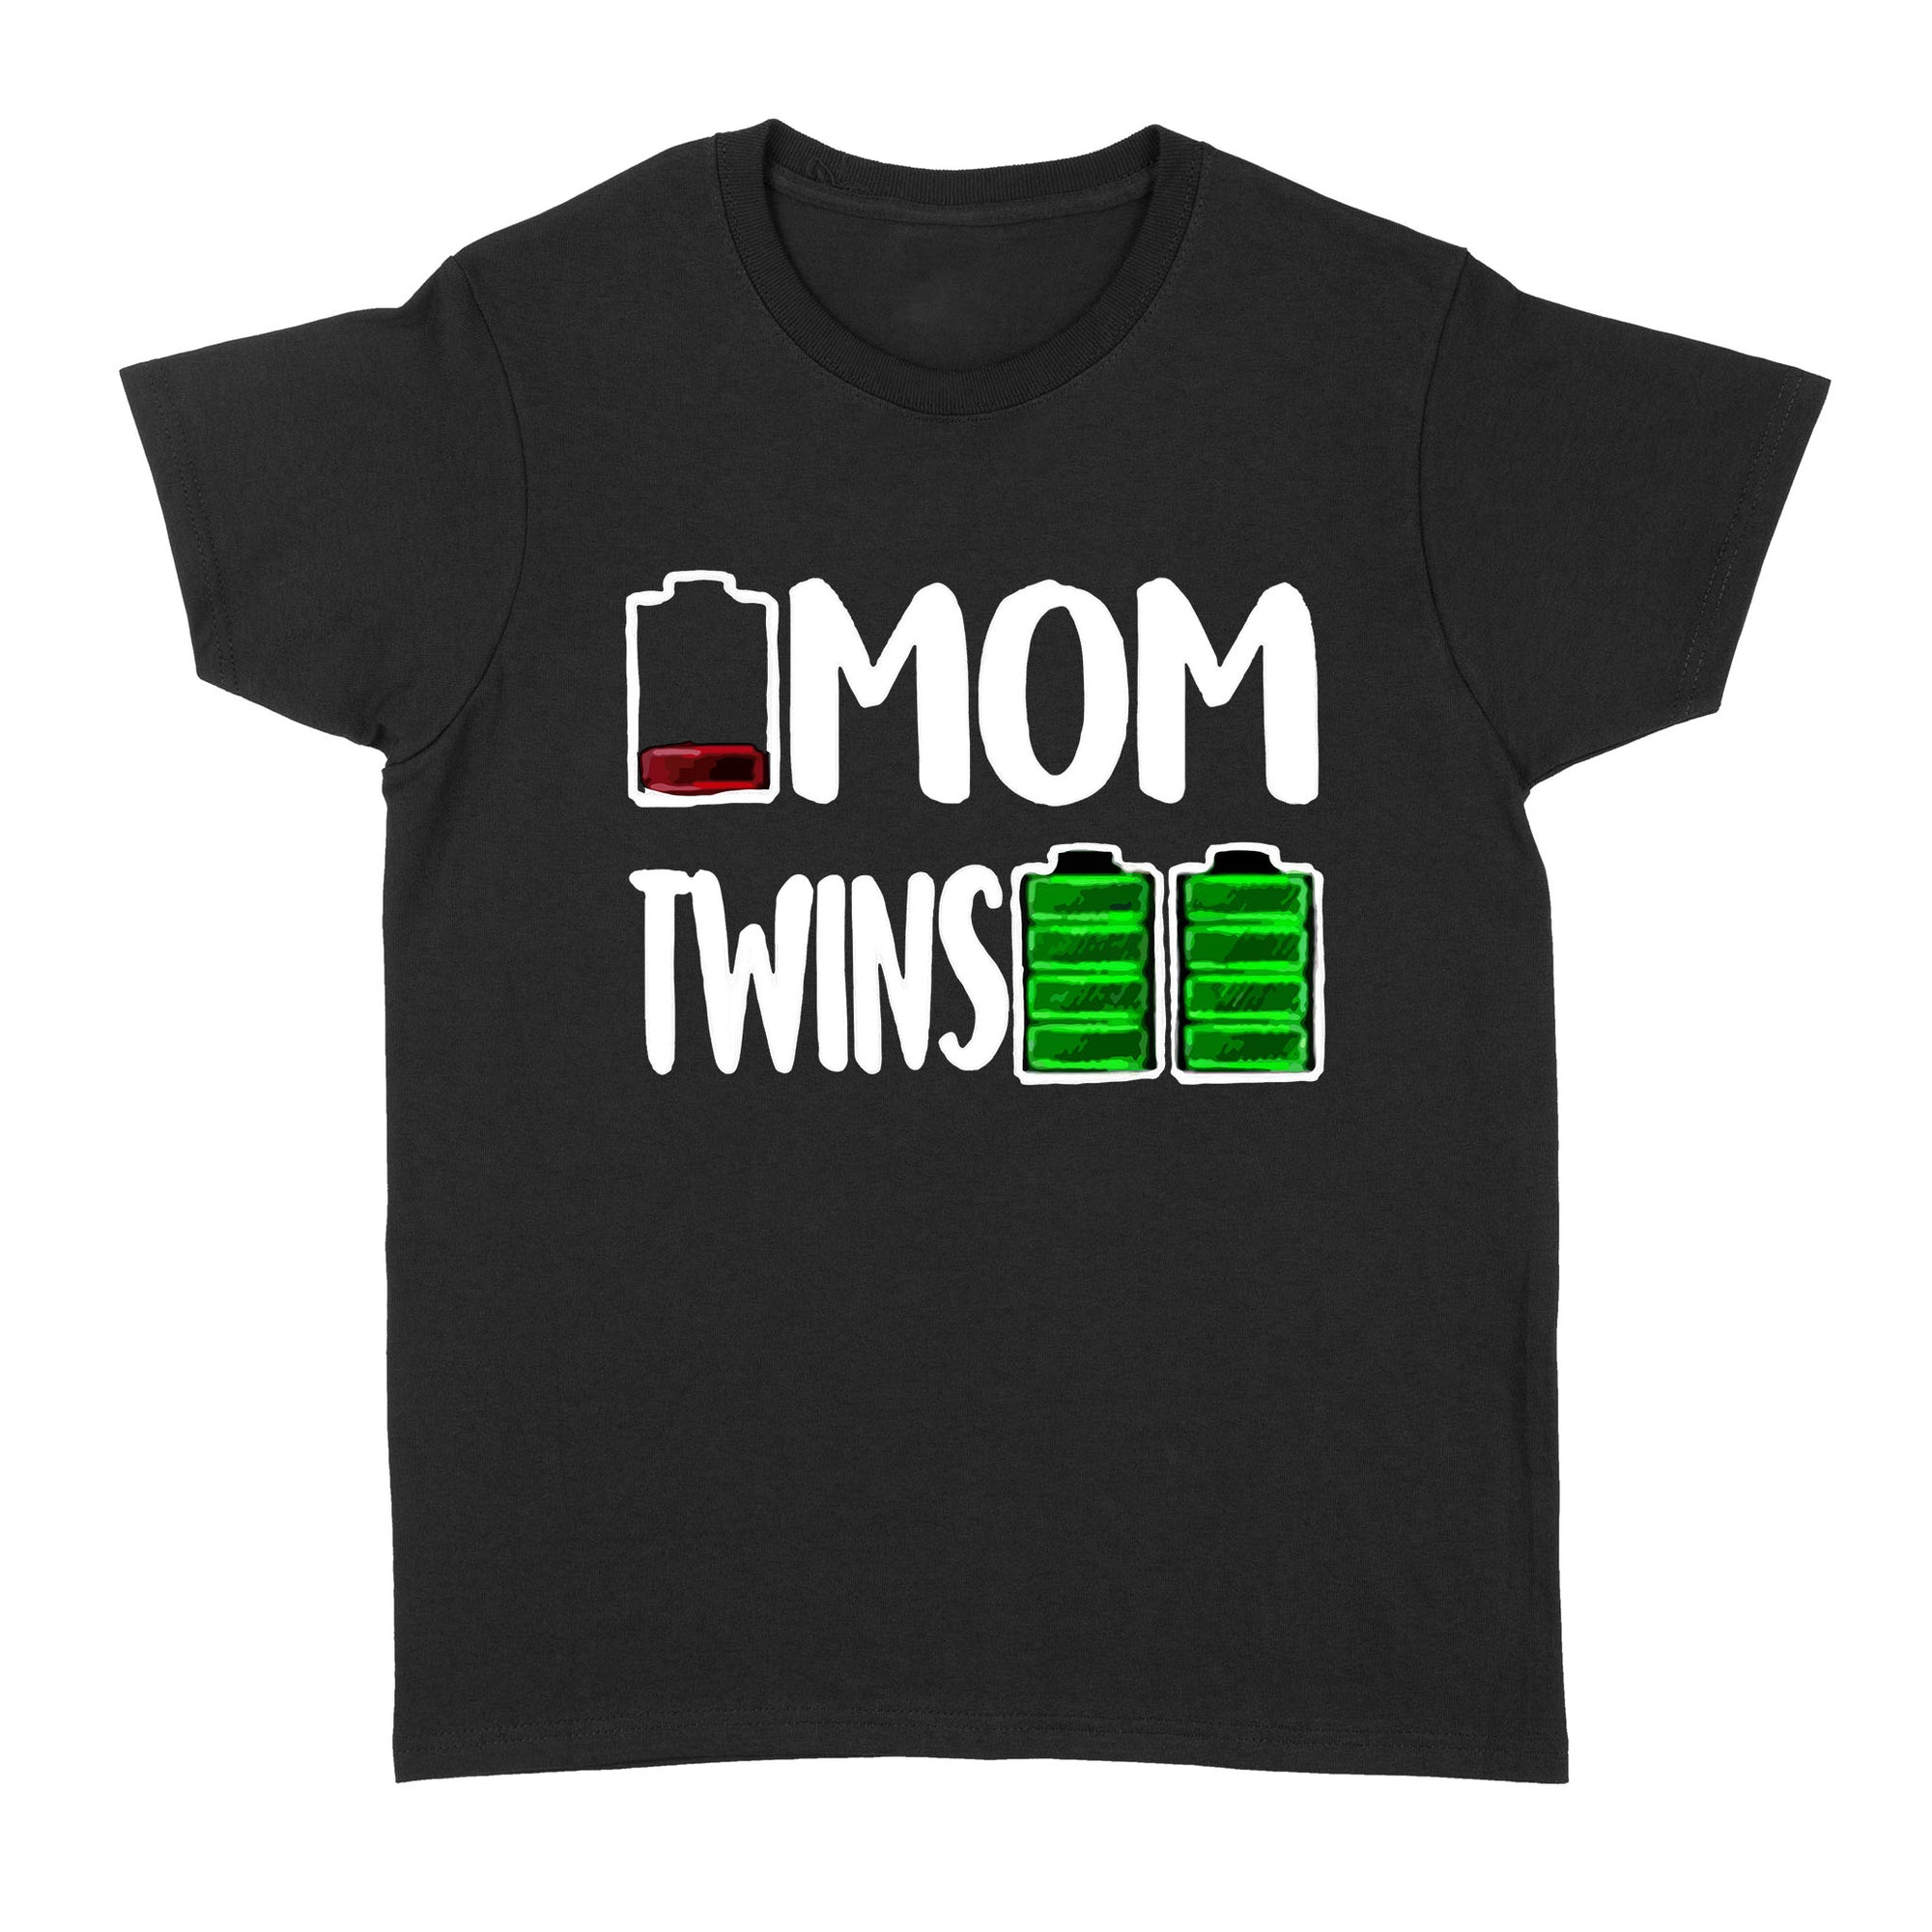 Gift Ideas for Mom Mothers Day Mom Low Battery Twins Full Charge - Standard Women's T-shirt